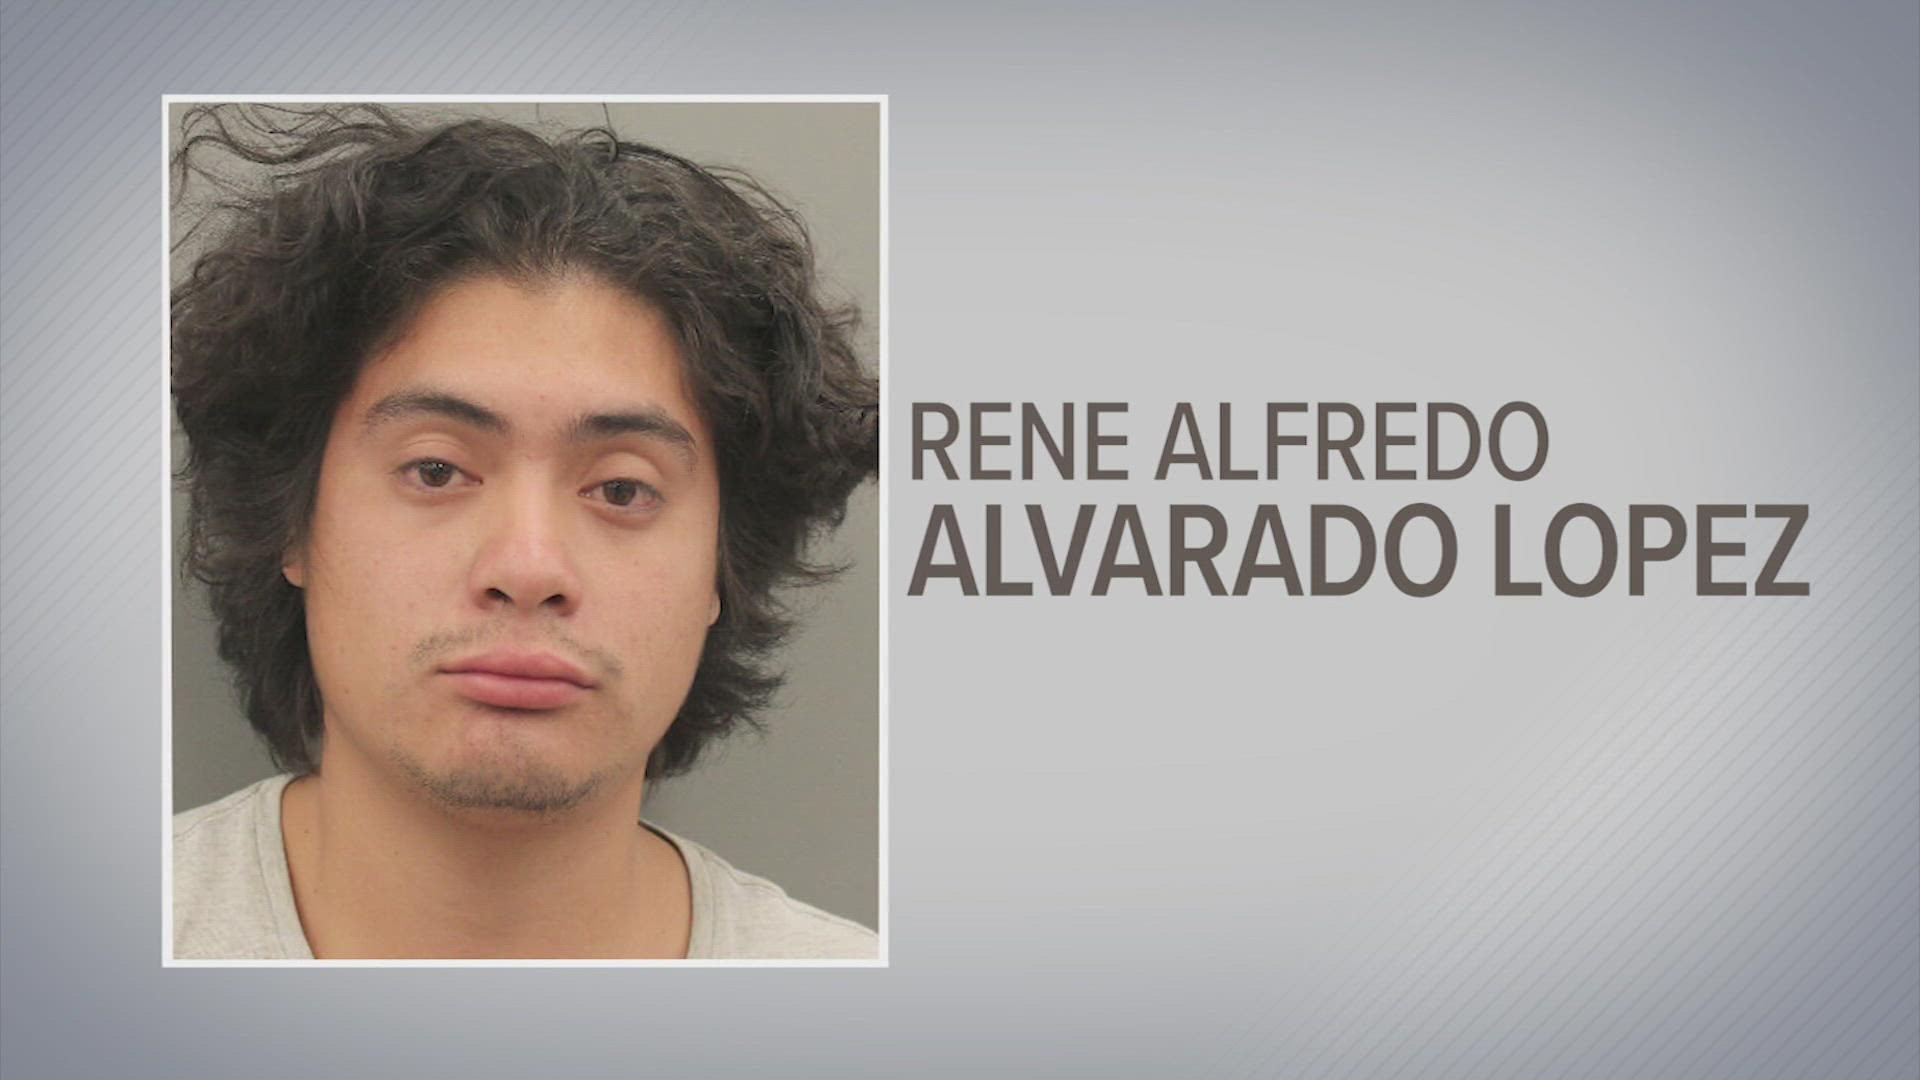 Rene Alfredo Alvaredo, 22, is also charged with failure to stop and render aid after the toddler was run over at an apartment complex.